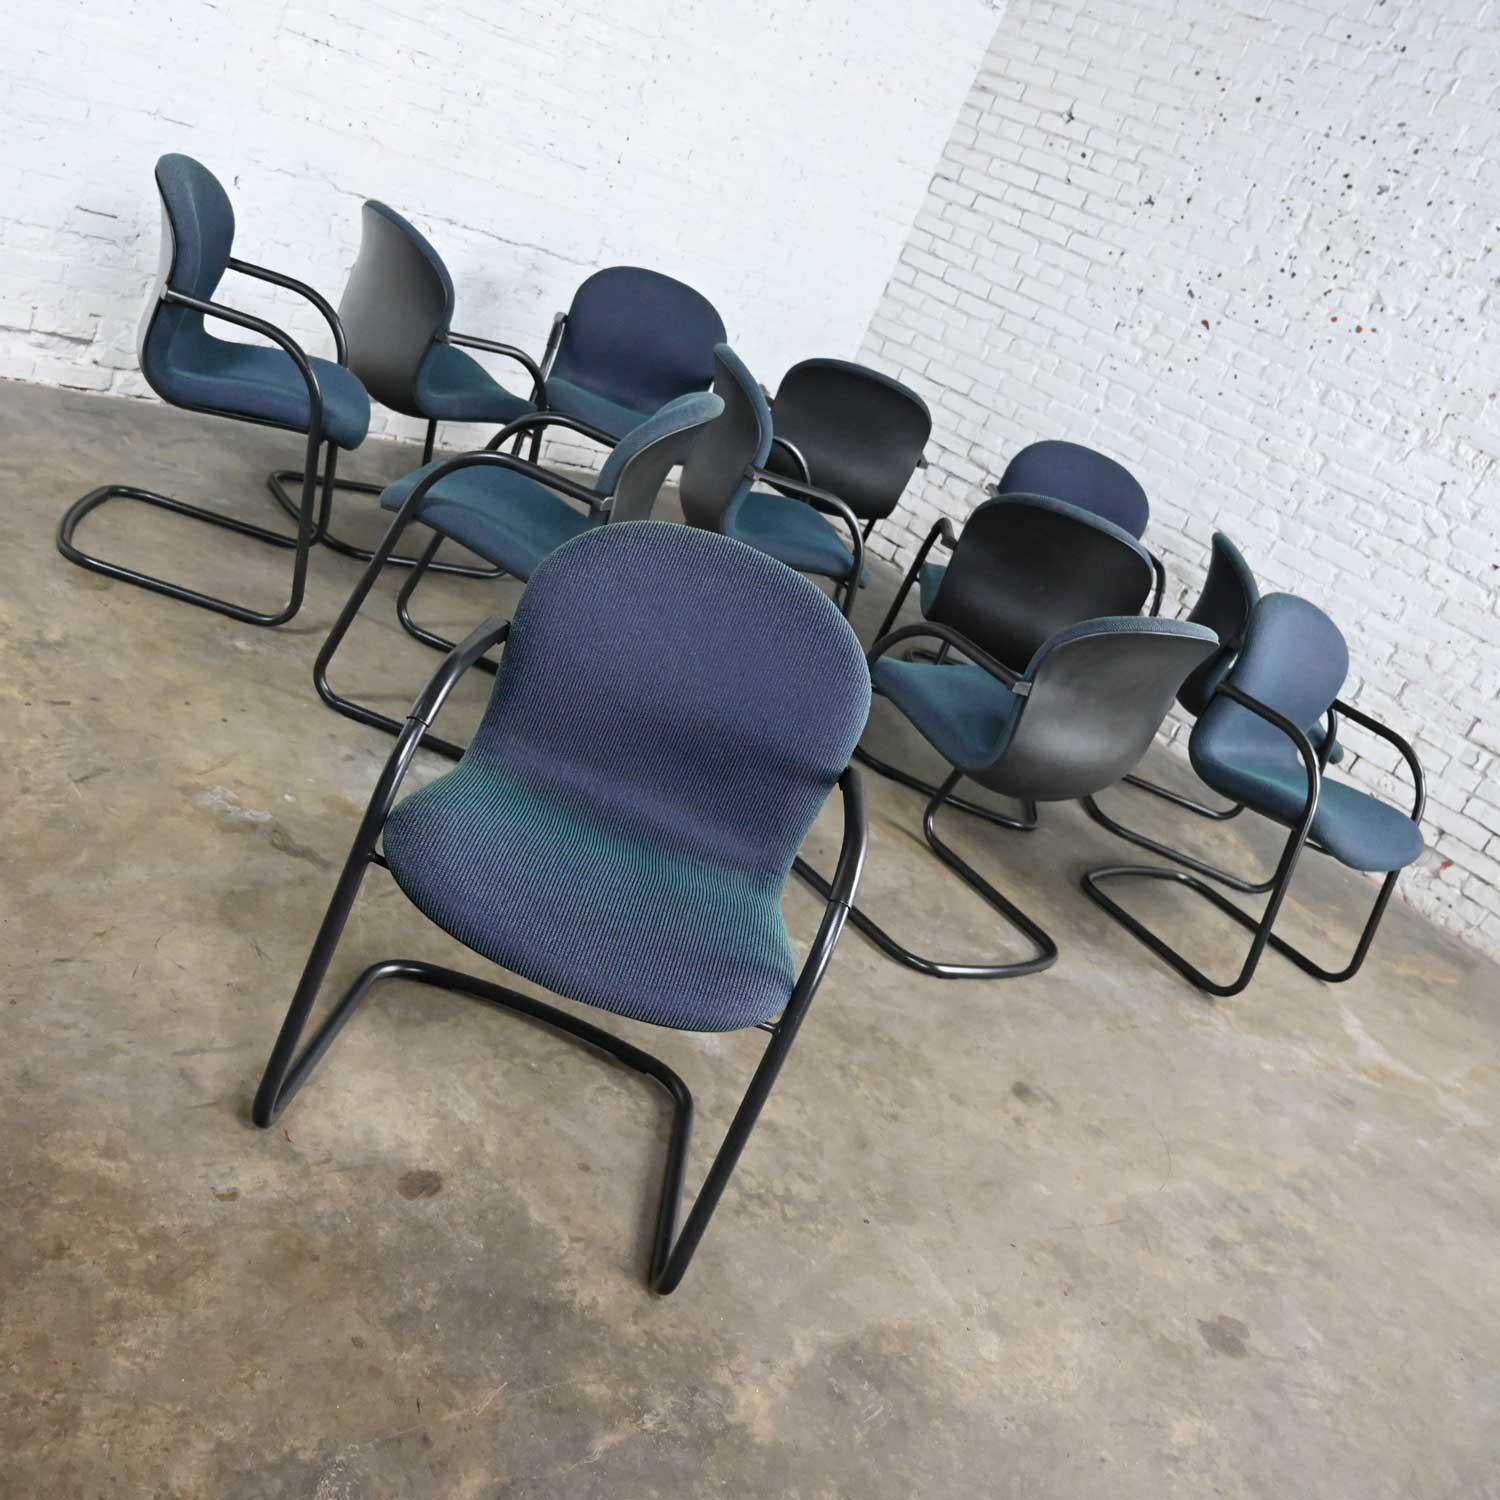 Handsome vintage Modern discontinued Bulldog Armed Side Chairs by Michael McCoy & Dale Fahnstrom for Knoll with black cantilever bases and blue fabric 12 total. Beautiful condition, keeping in mind that these are vintage and not new so will have